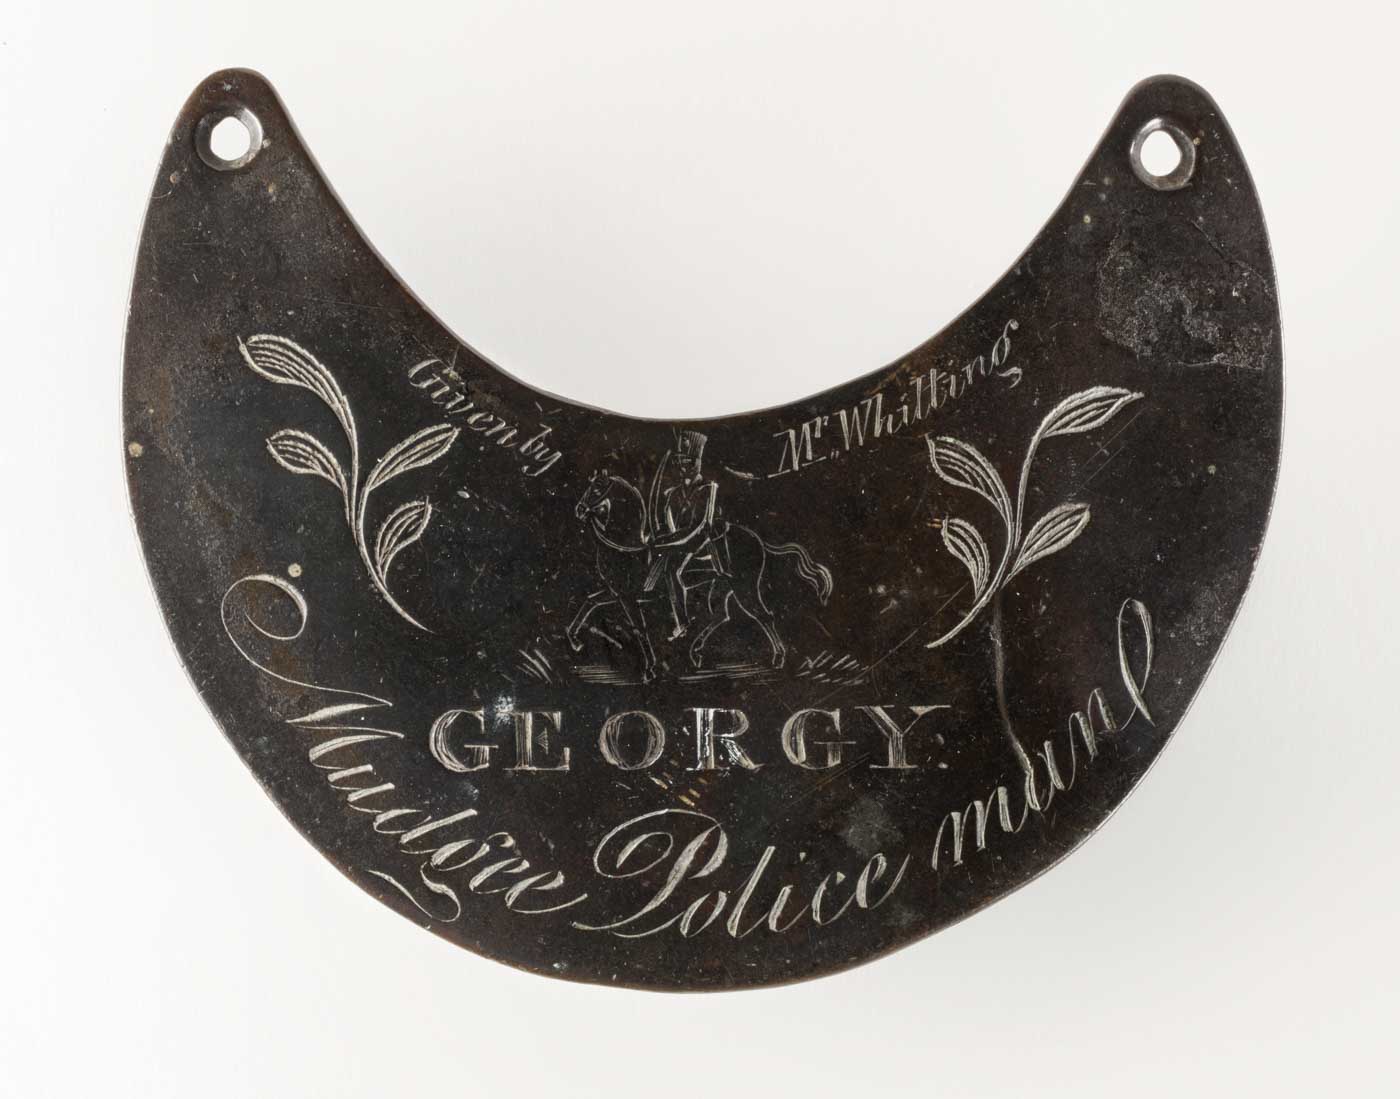 Engraved breastplate with an image of a mounted police man. - click to view larger image